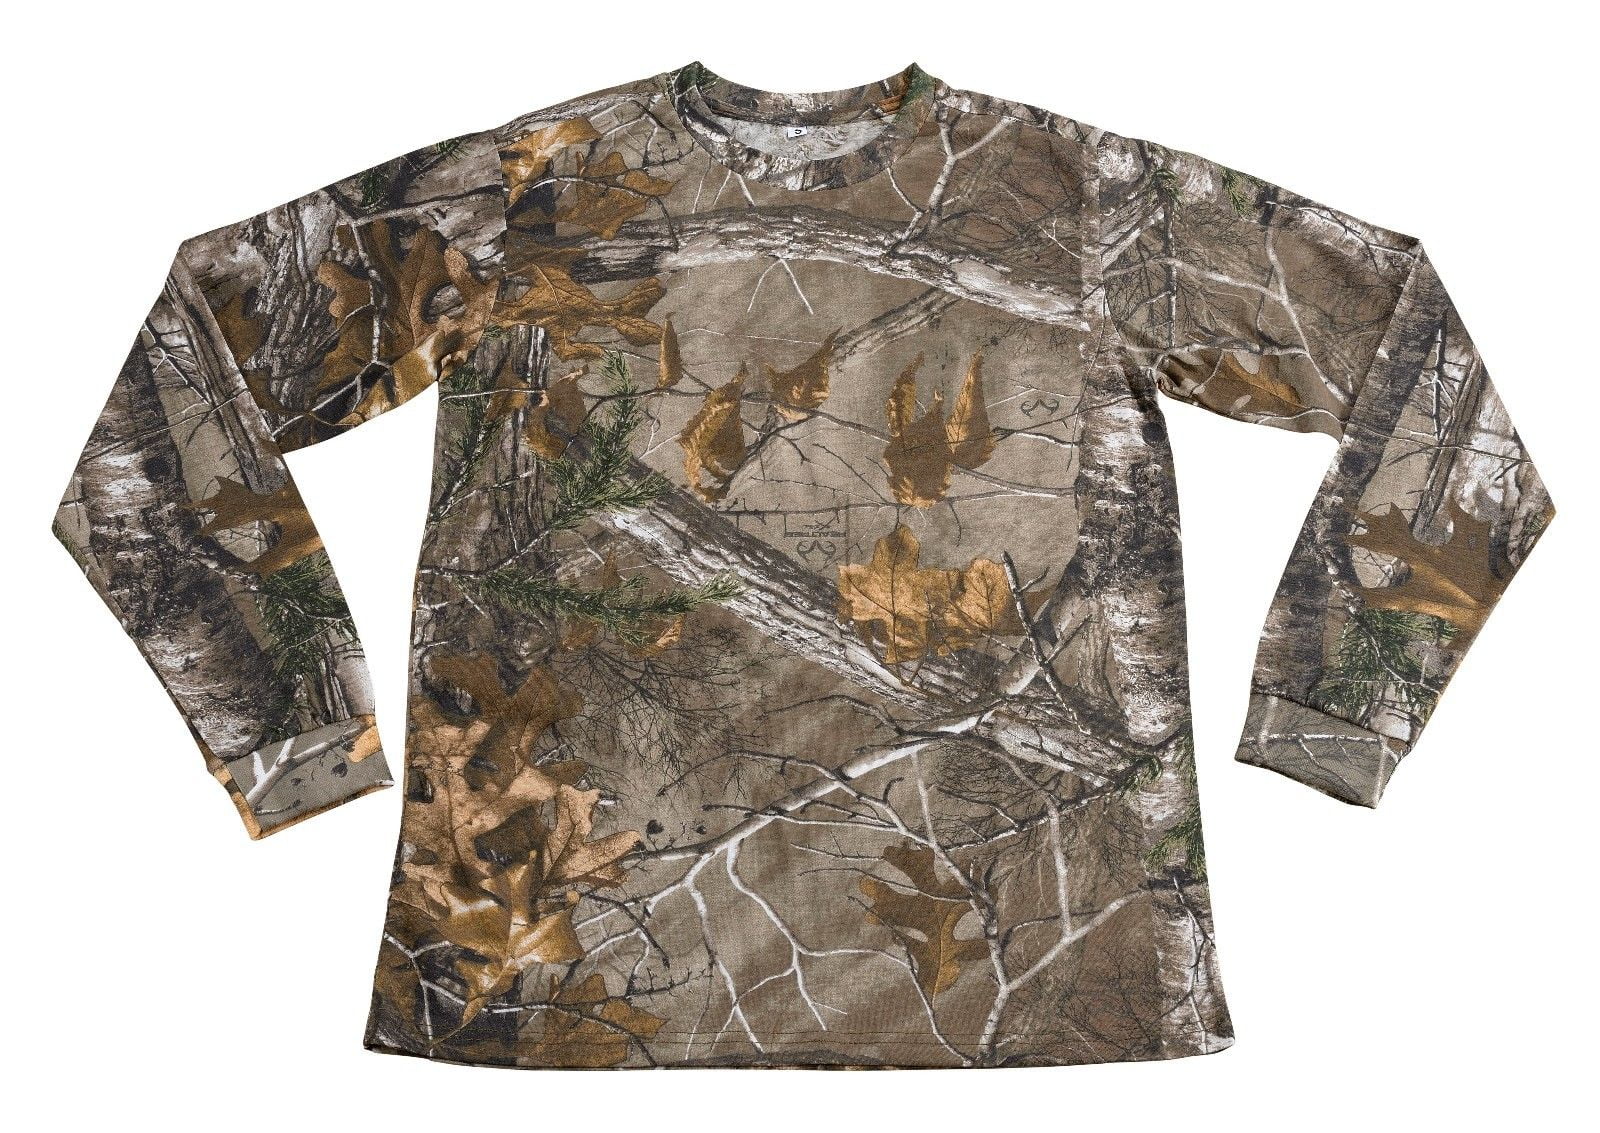 Adult Tie-Dye Long Sleeve T-Shirt 100% Cotton - Camo Camouflage Marble